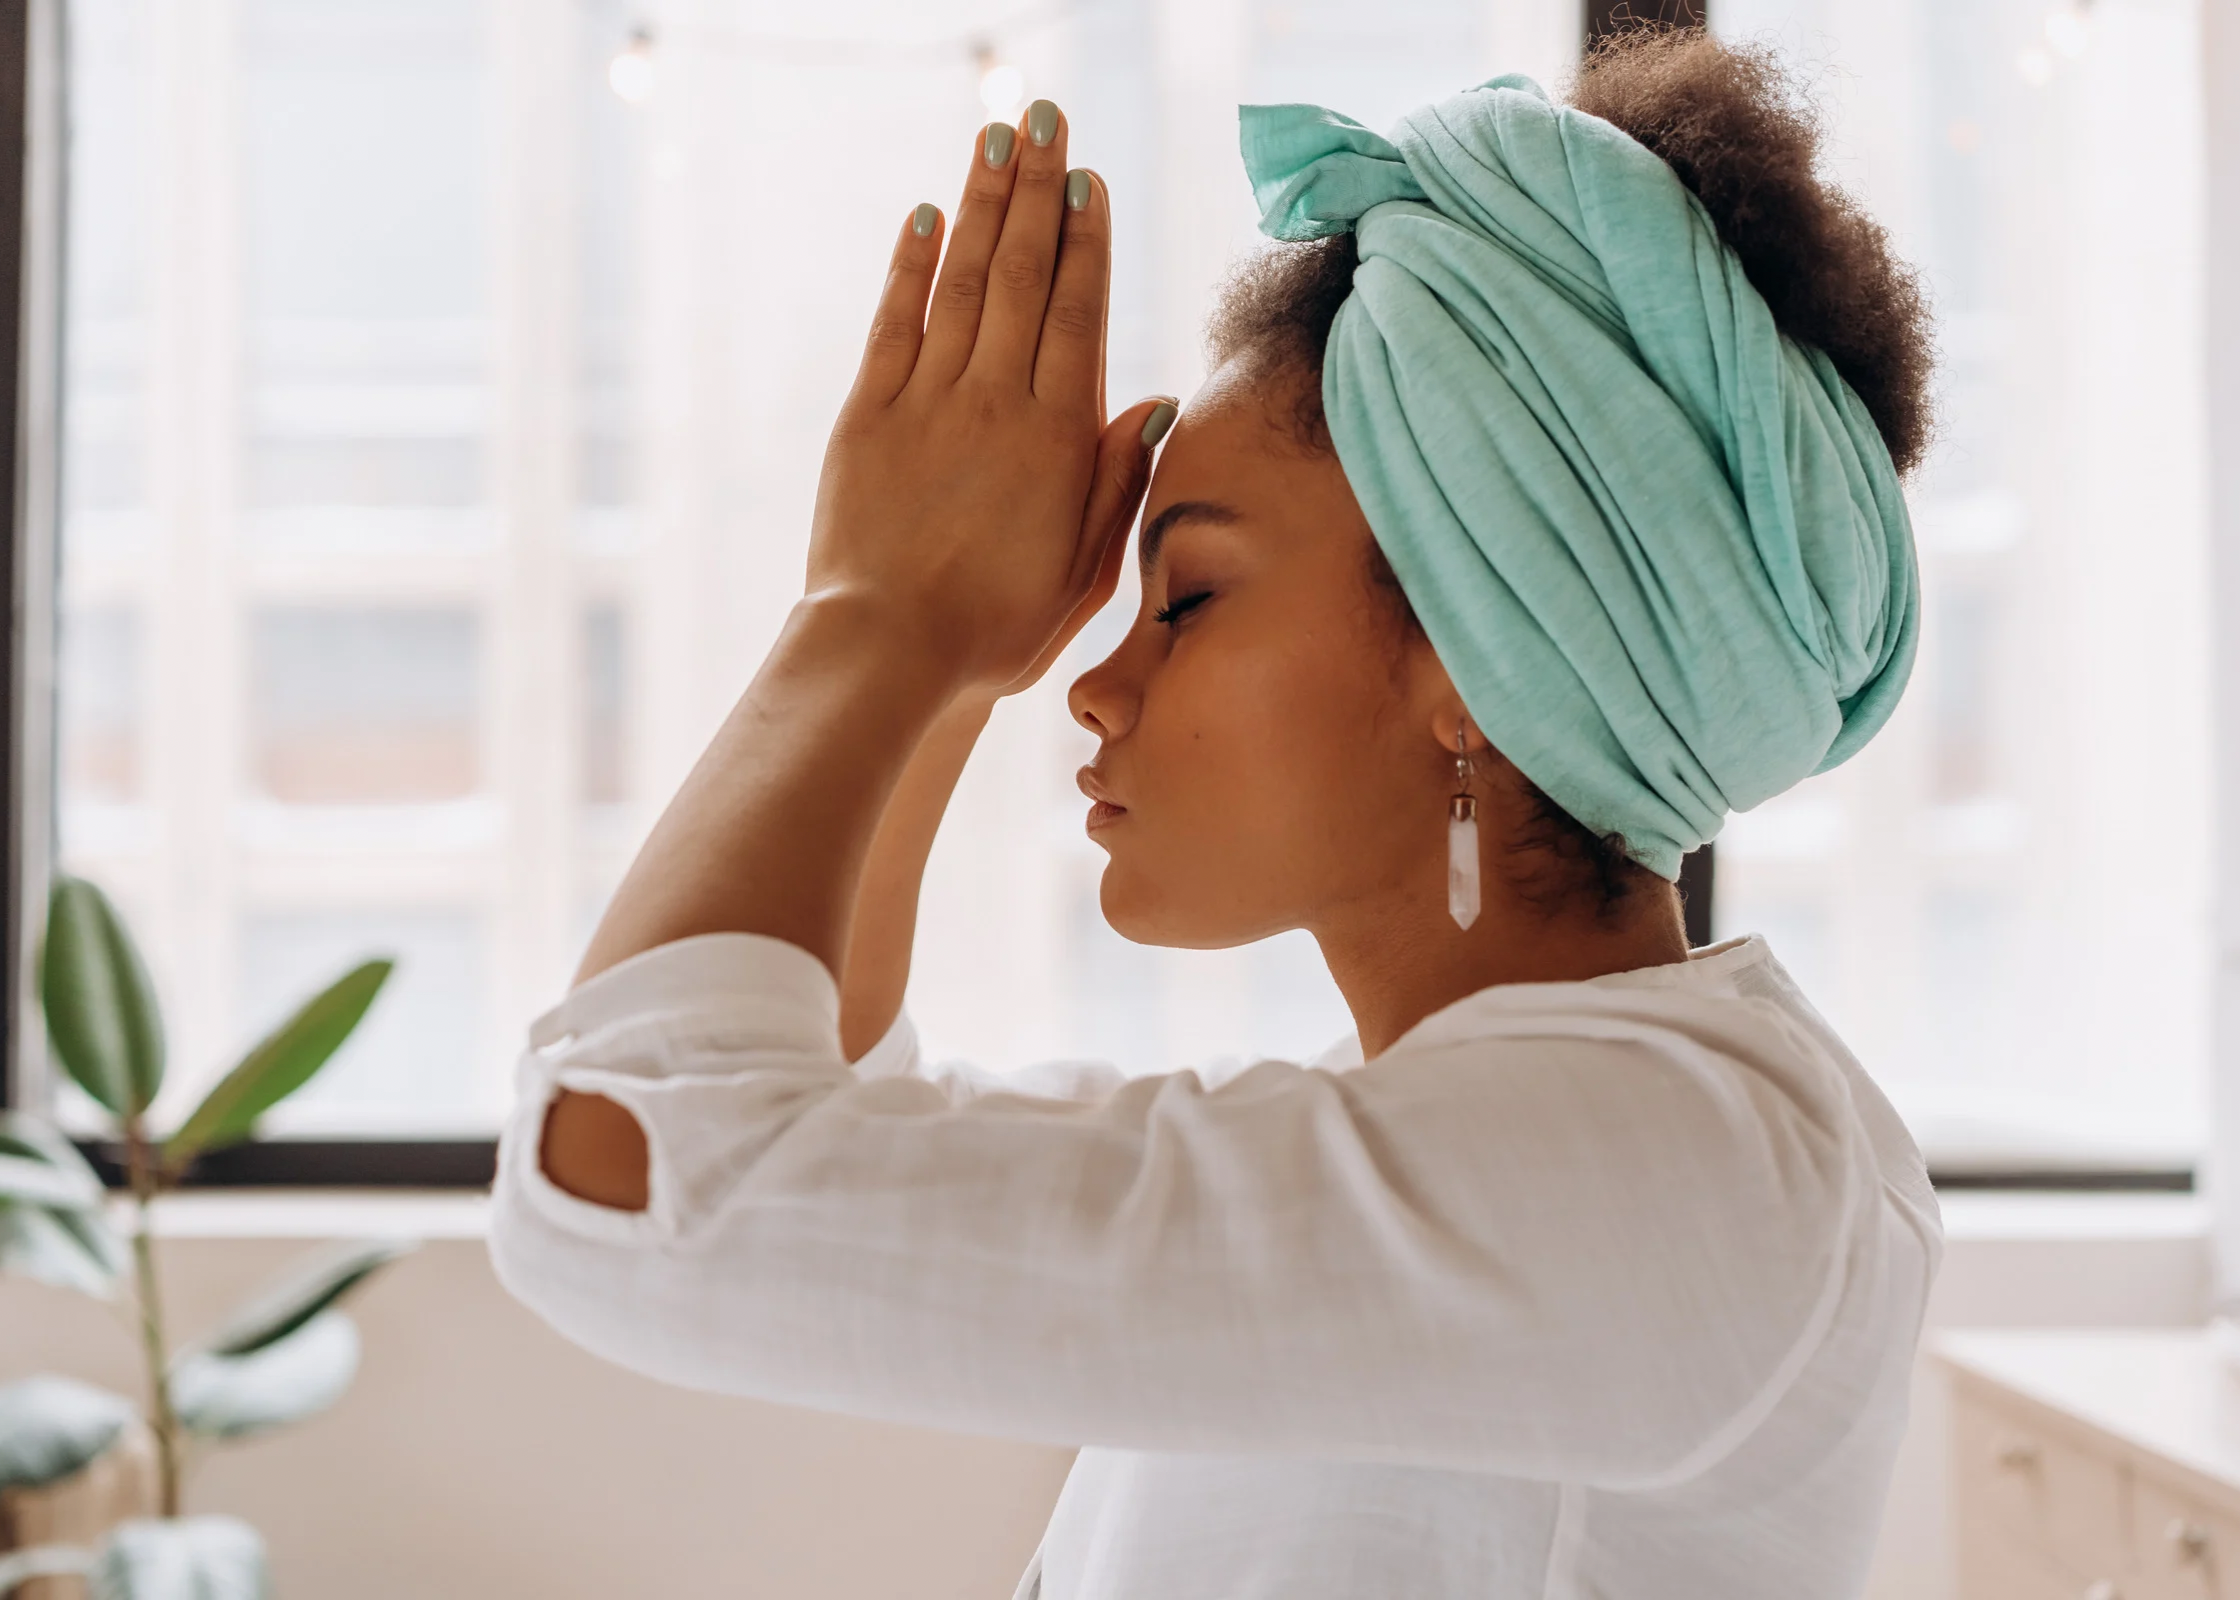 black woman meditating and in a peaceful state. relax after a long, hard, stressful day at work or at home. Ways to unwind and decompress after a busy day and relieve stress.